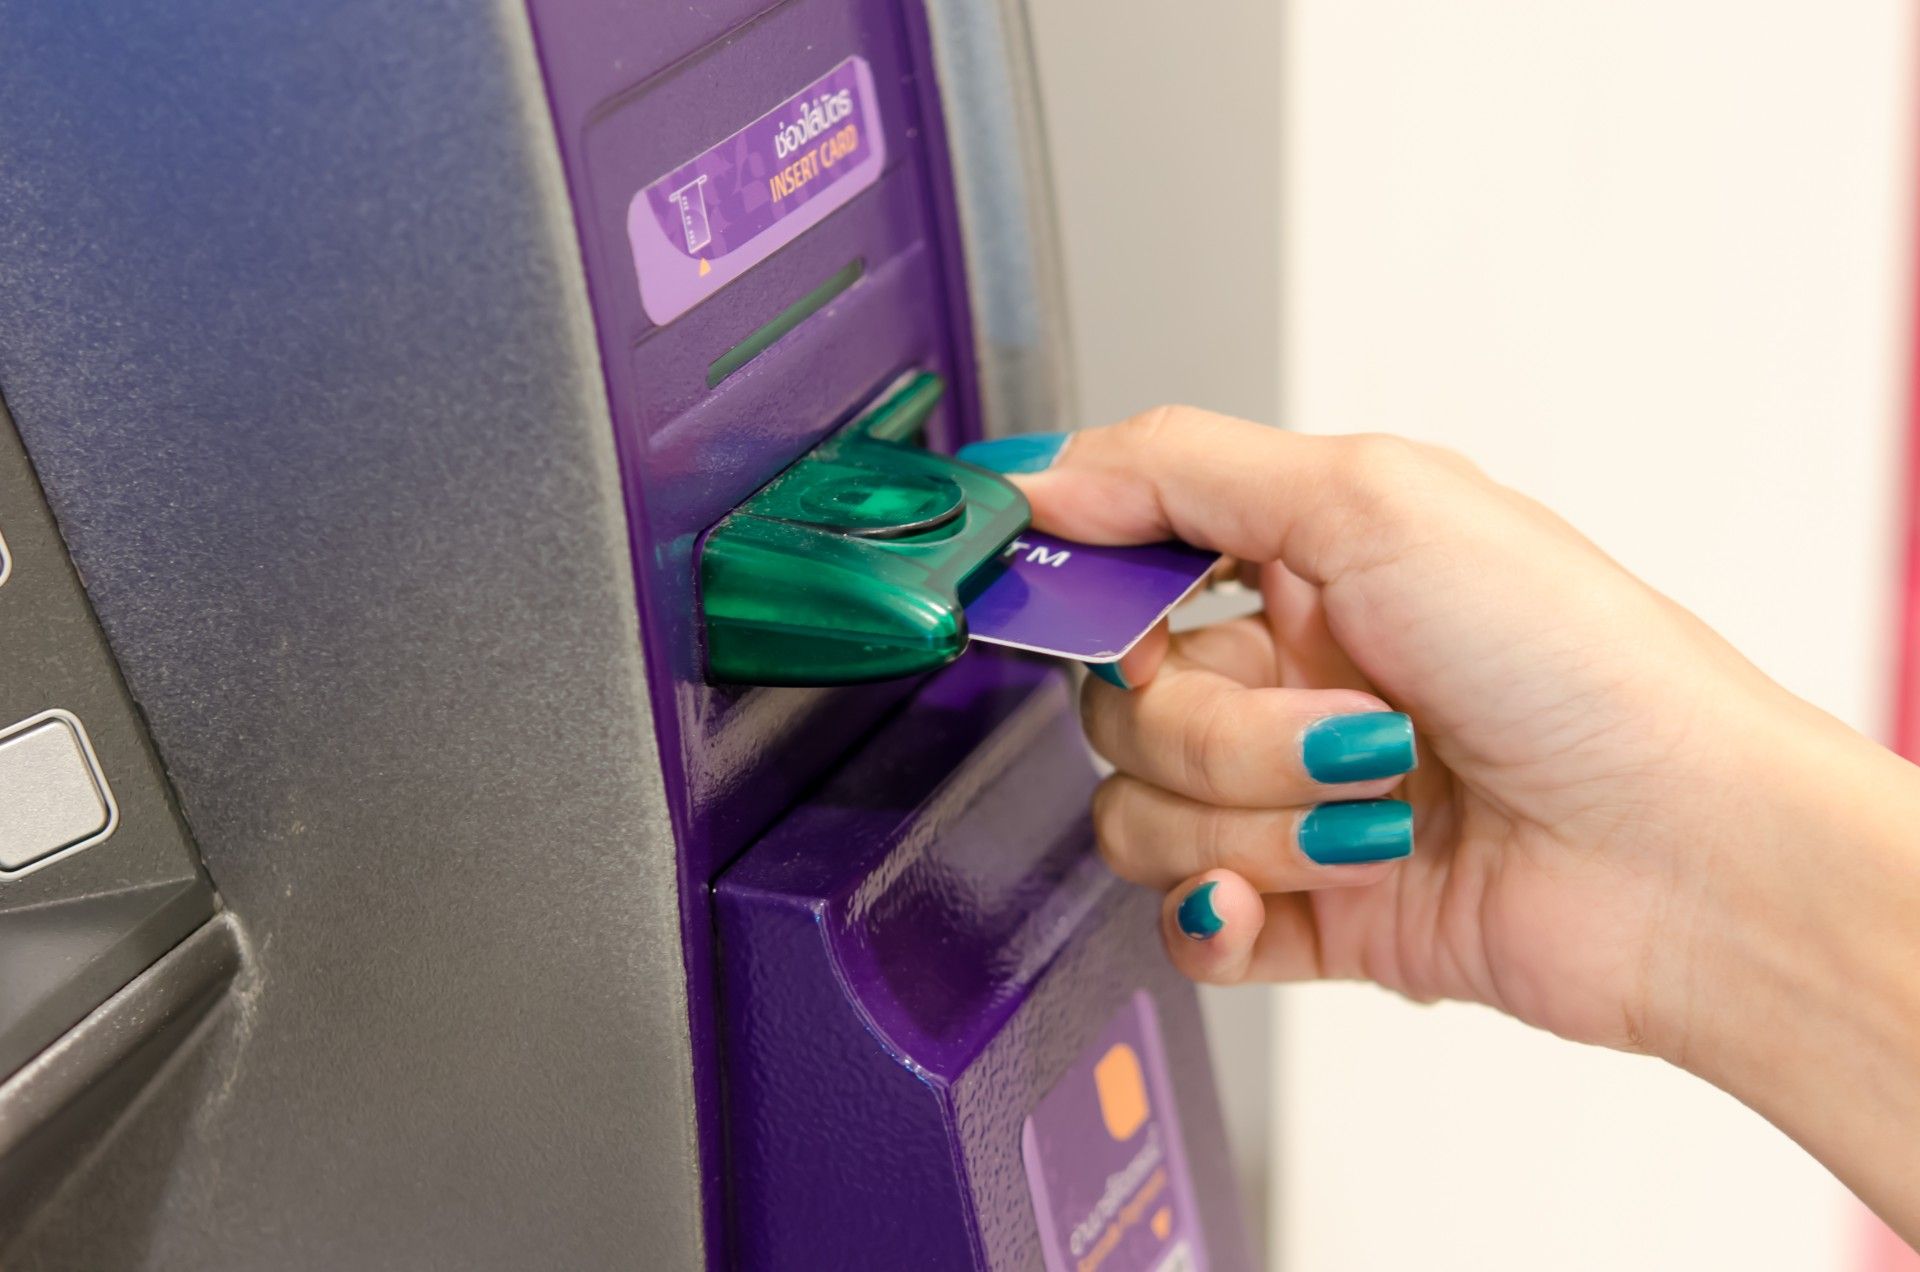 Woman inserts card into ATM - New rules for UK cash machines